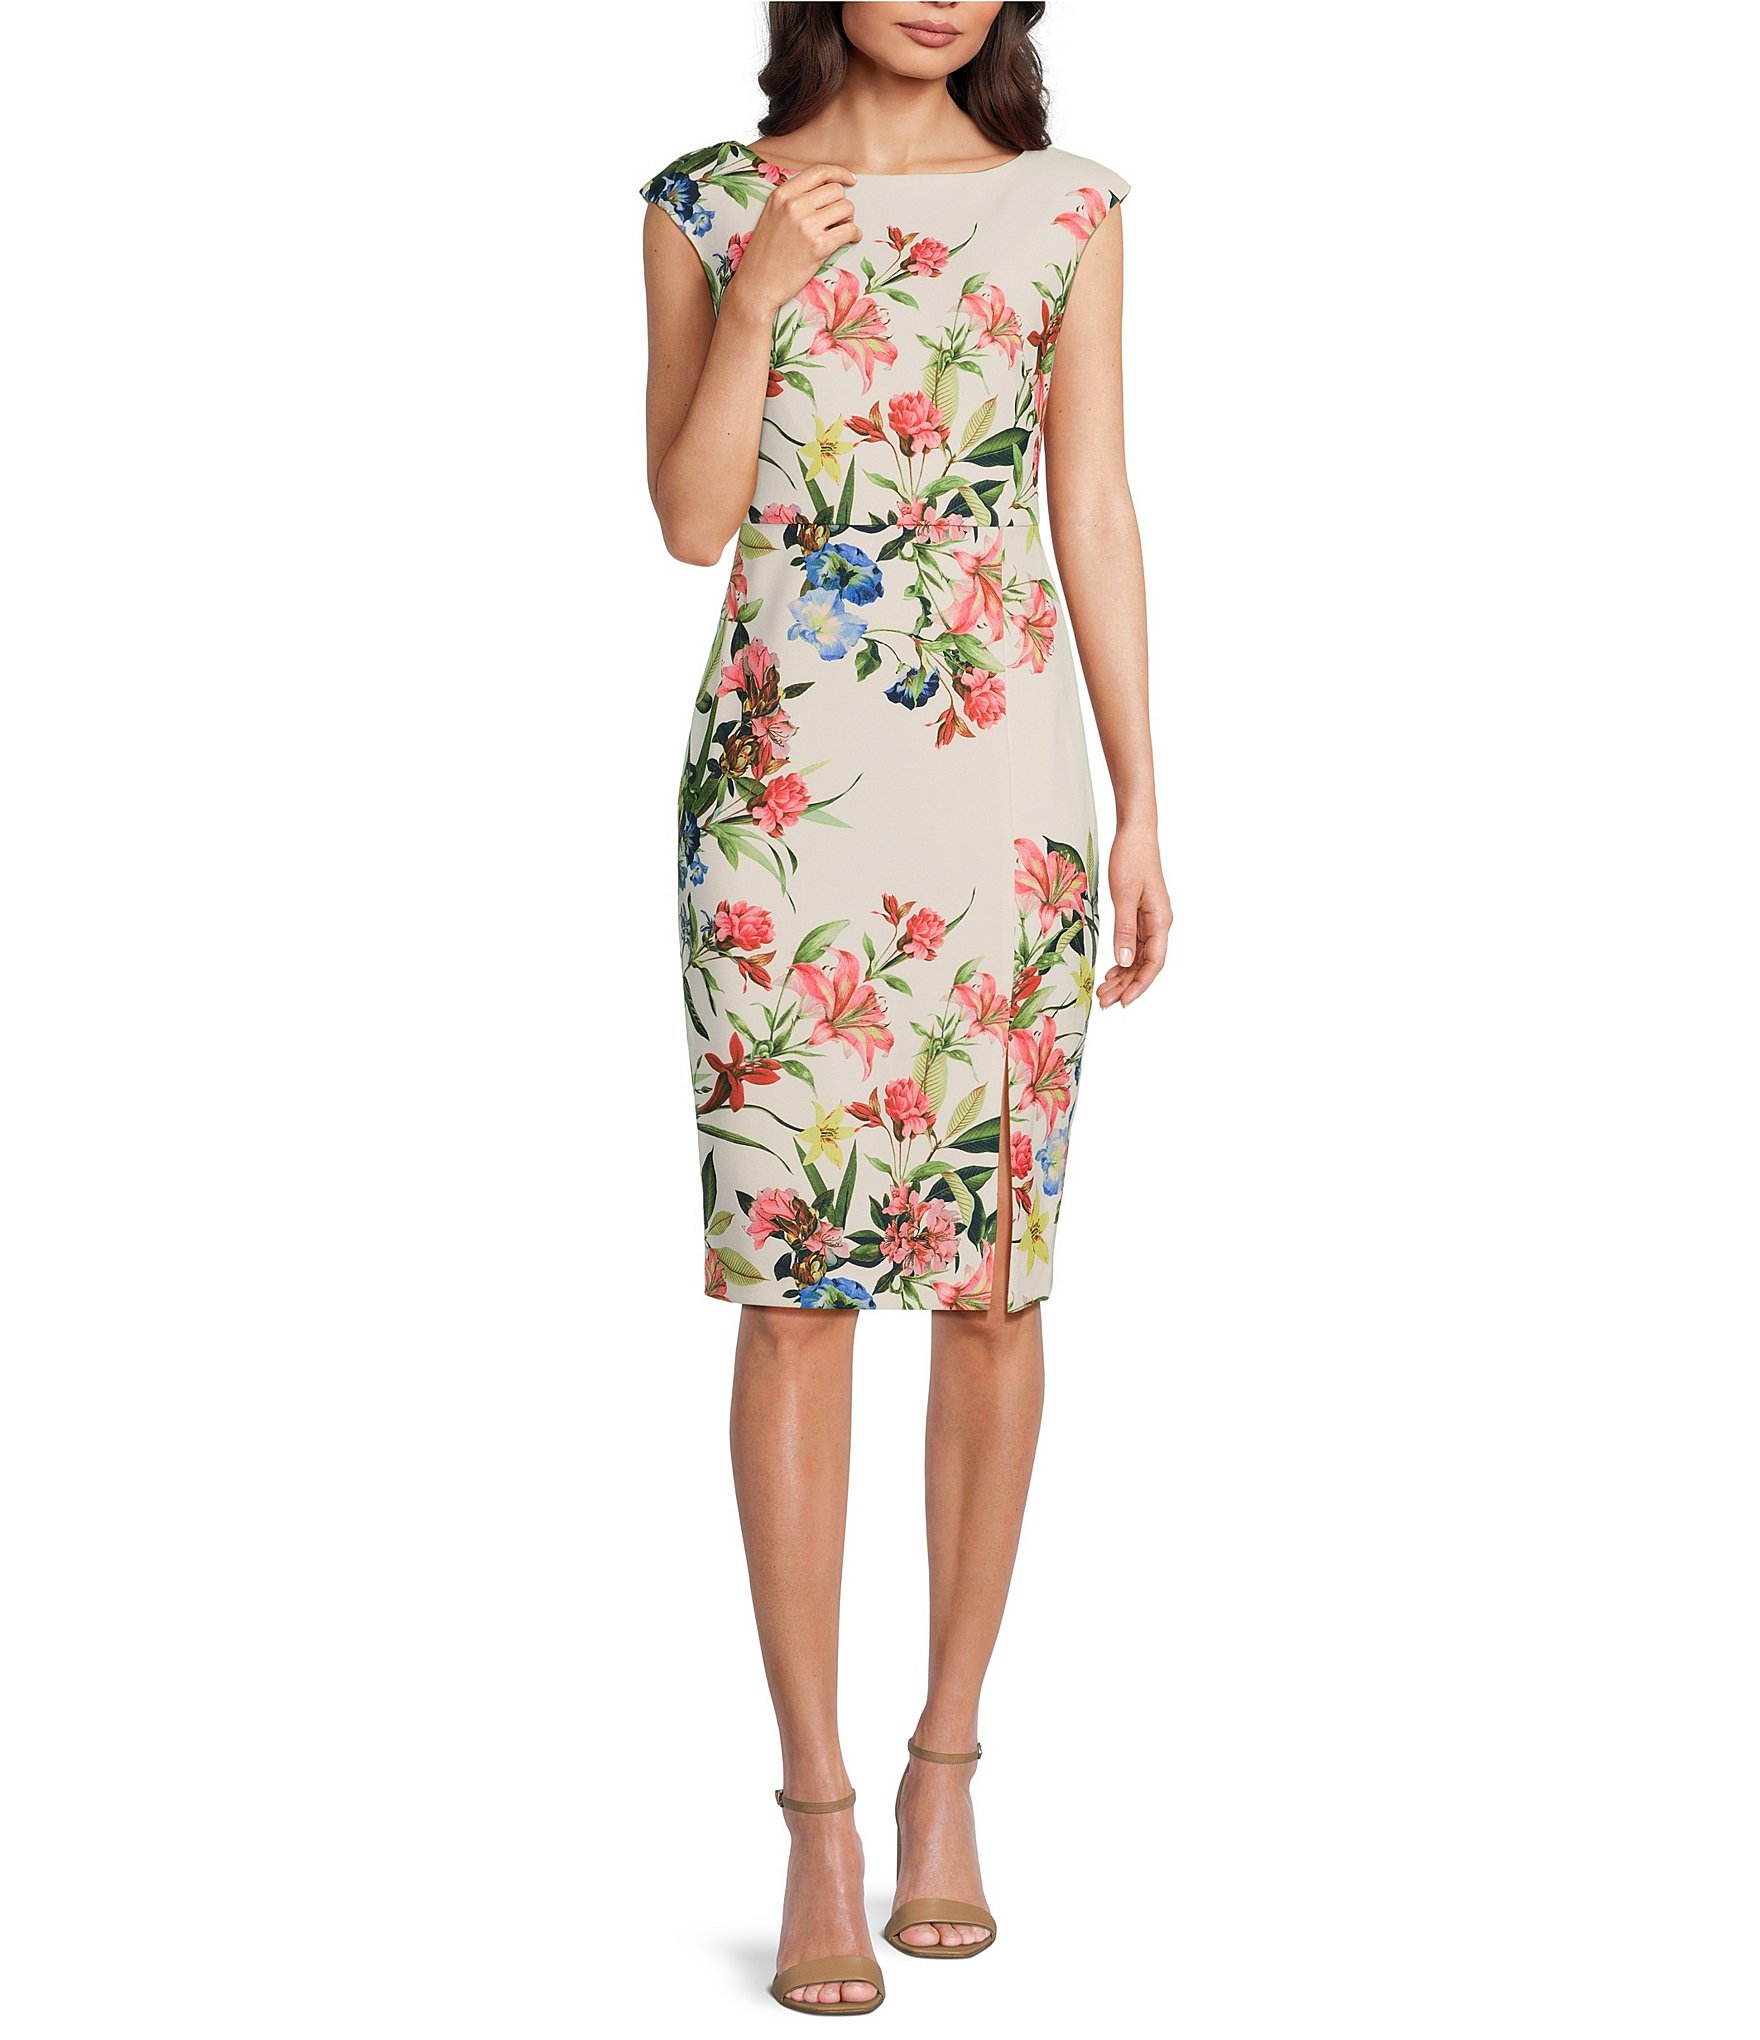 Layering with a Floral Sheath Dress